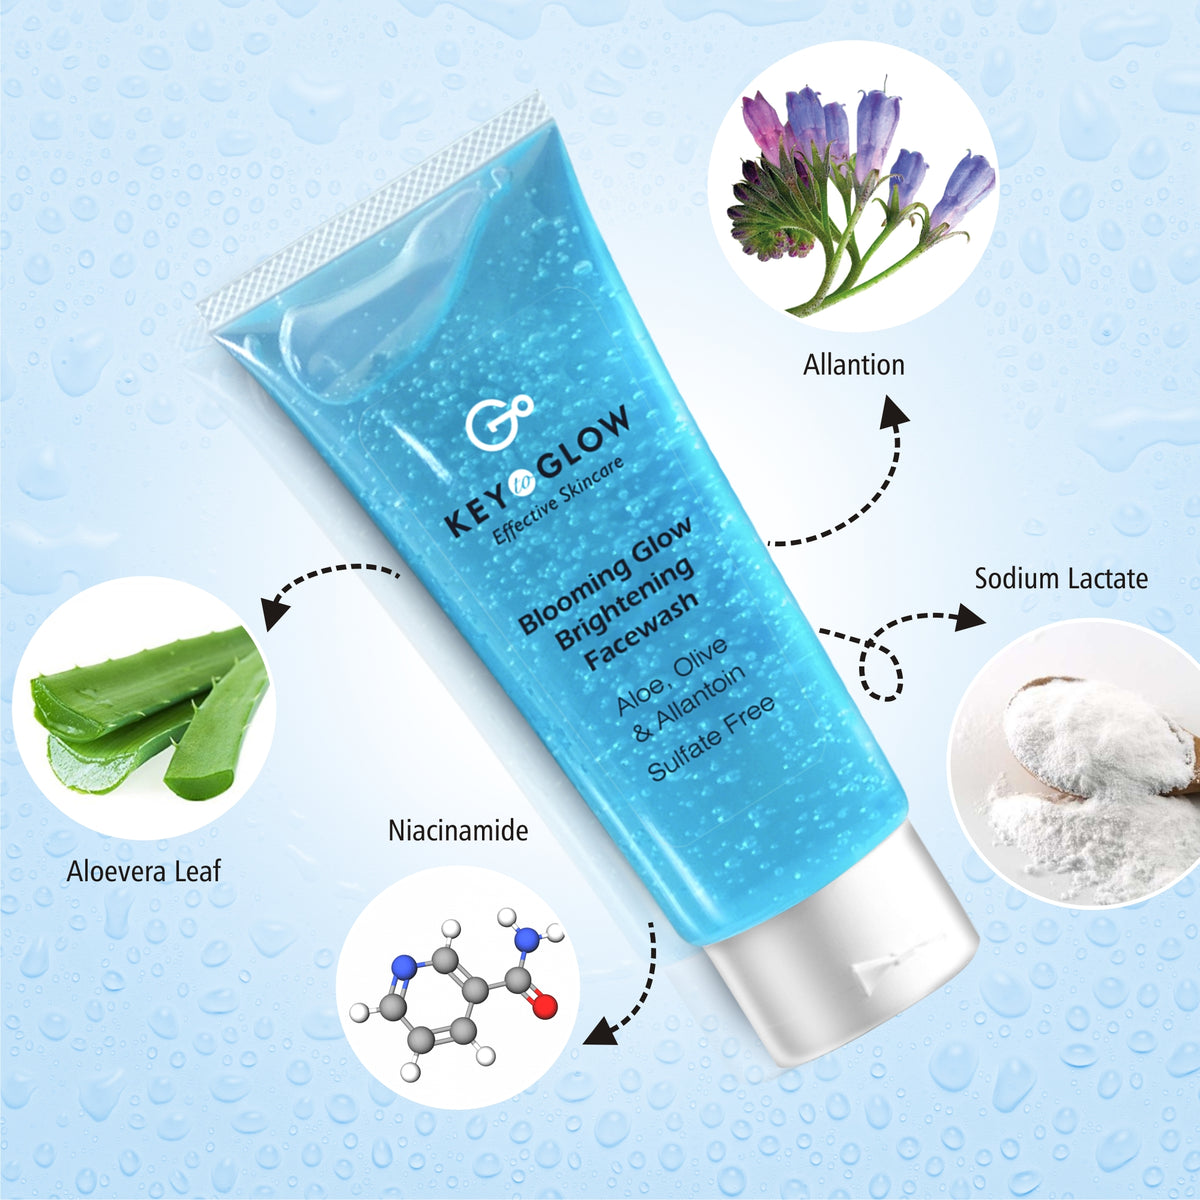 Blooming Glow Brightening Facewash Aloe + Olive + Allantoin Sulfate Free - 100g - Key to Glow 